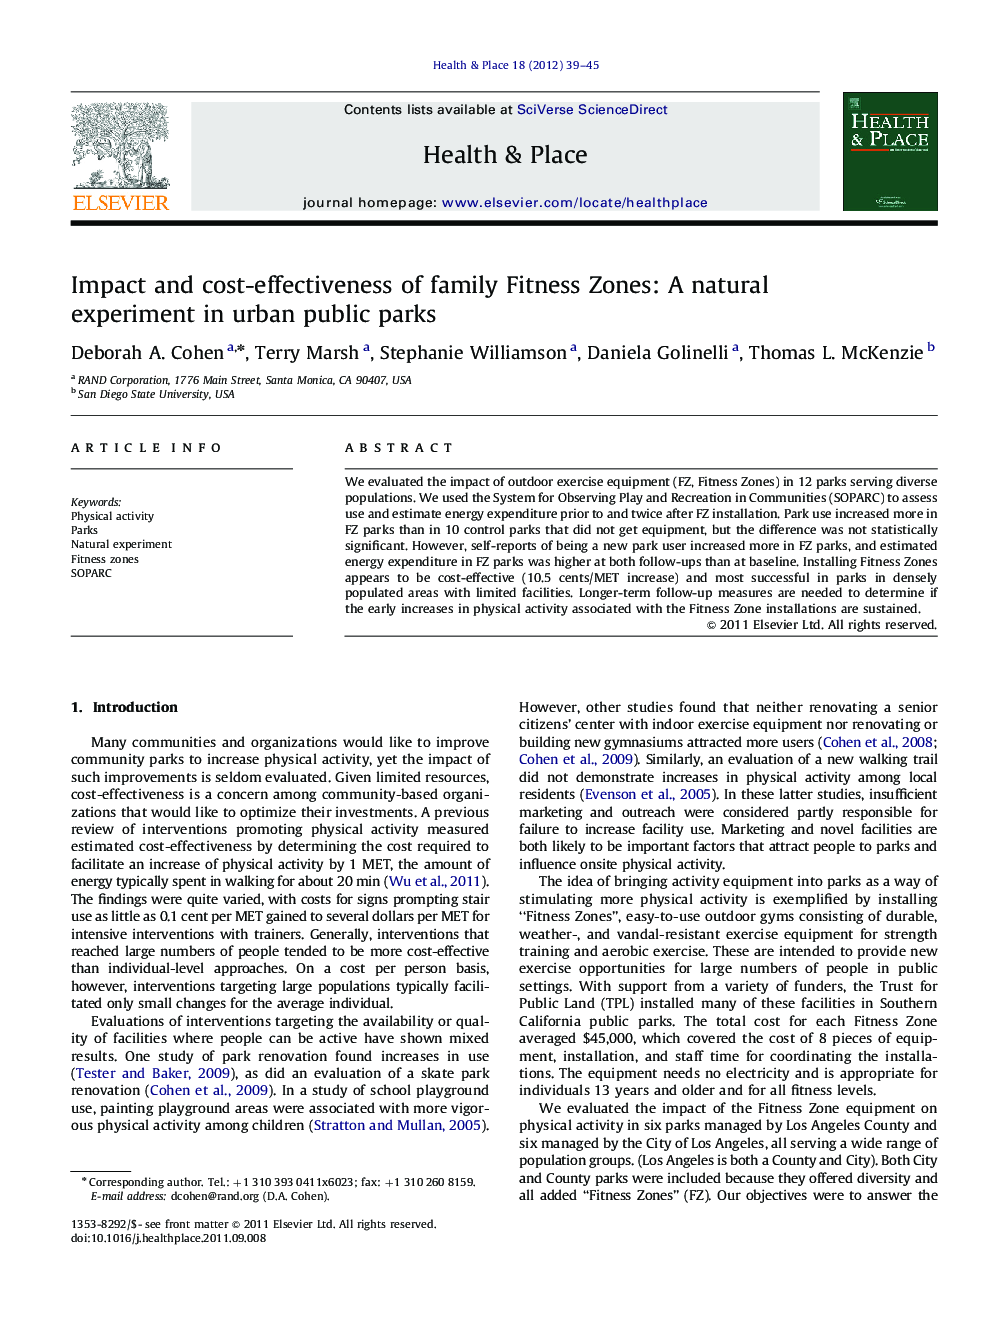 Impact and cost-effectiveness of family Fitness Zones: A natural experiment in urban public parks